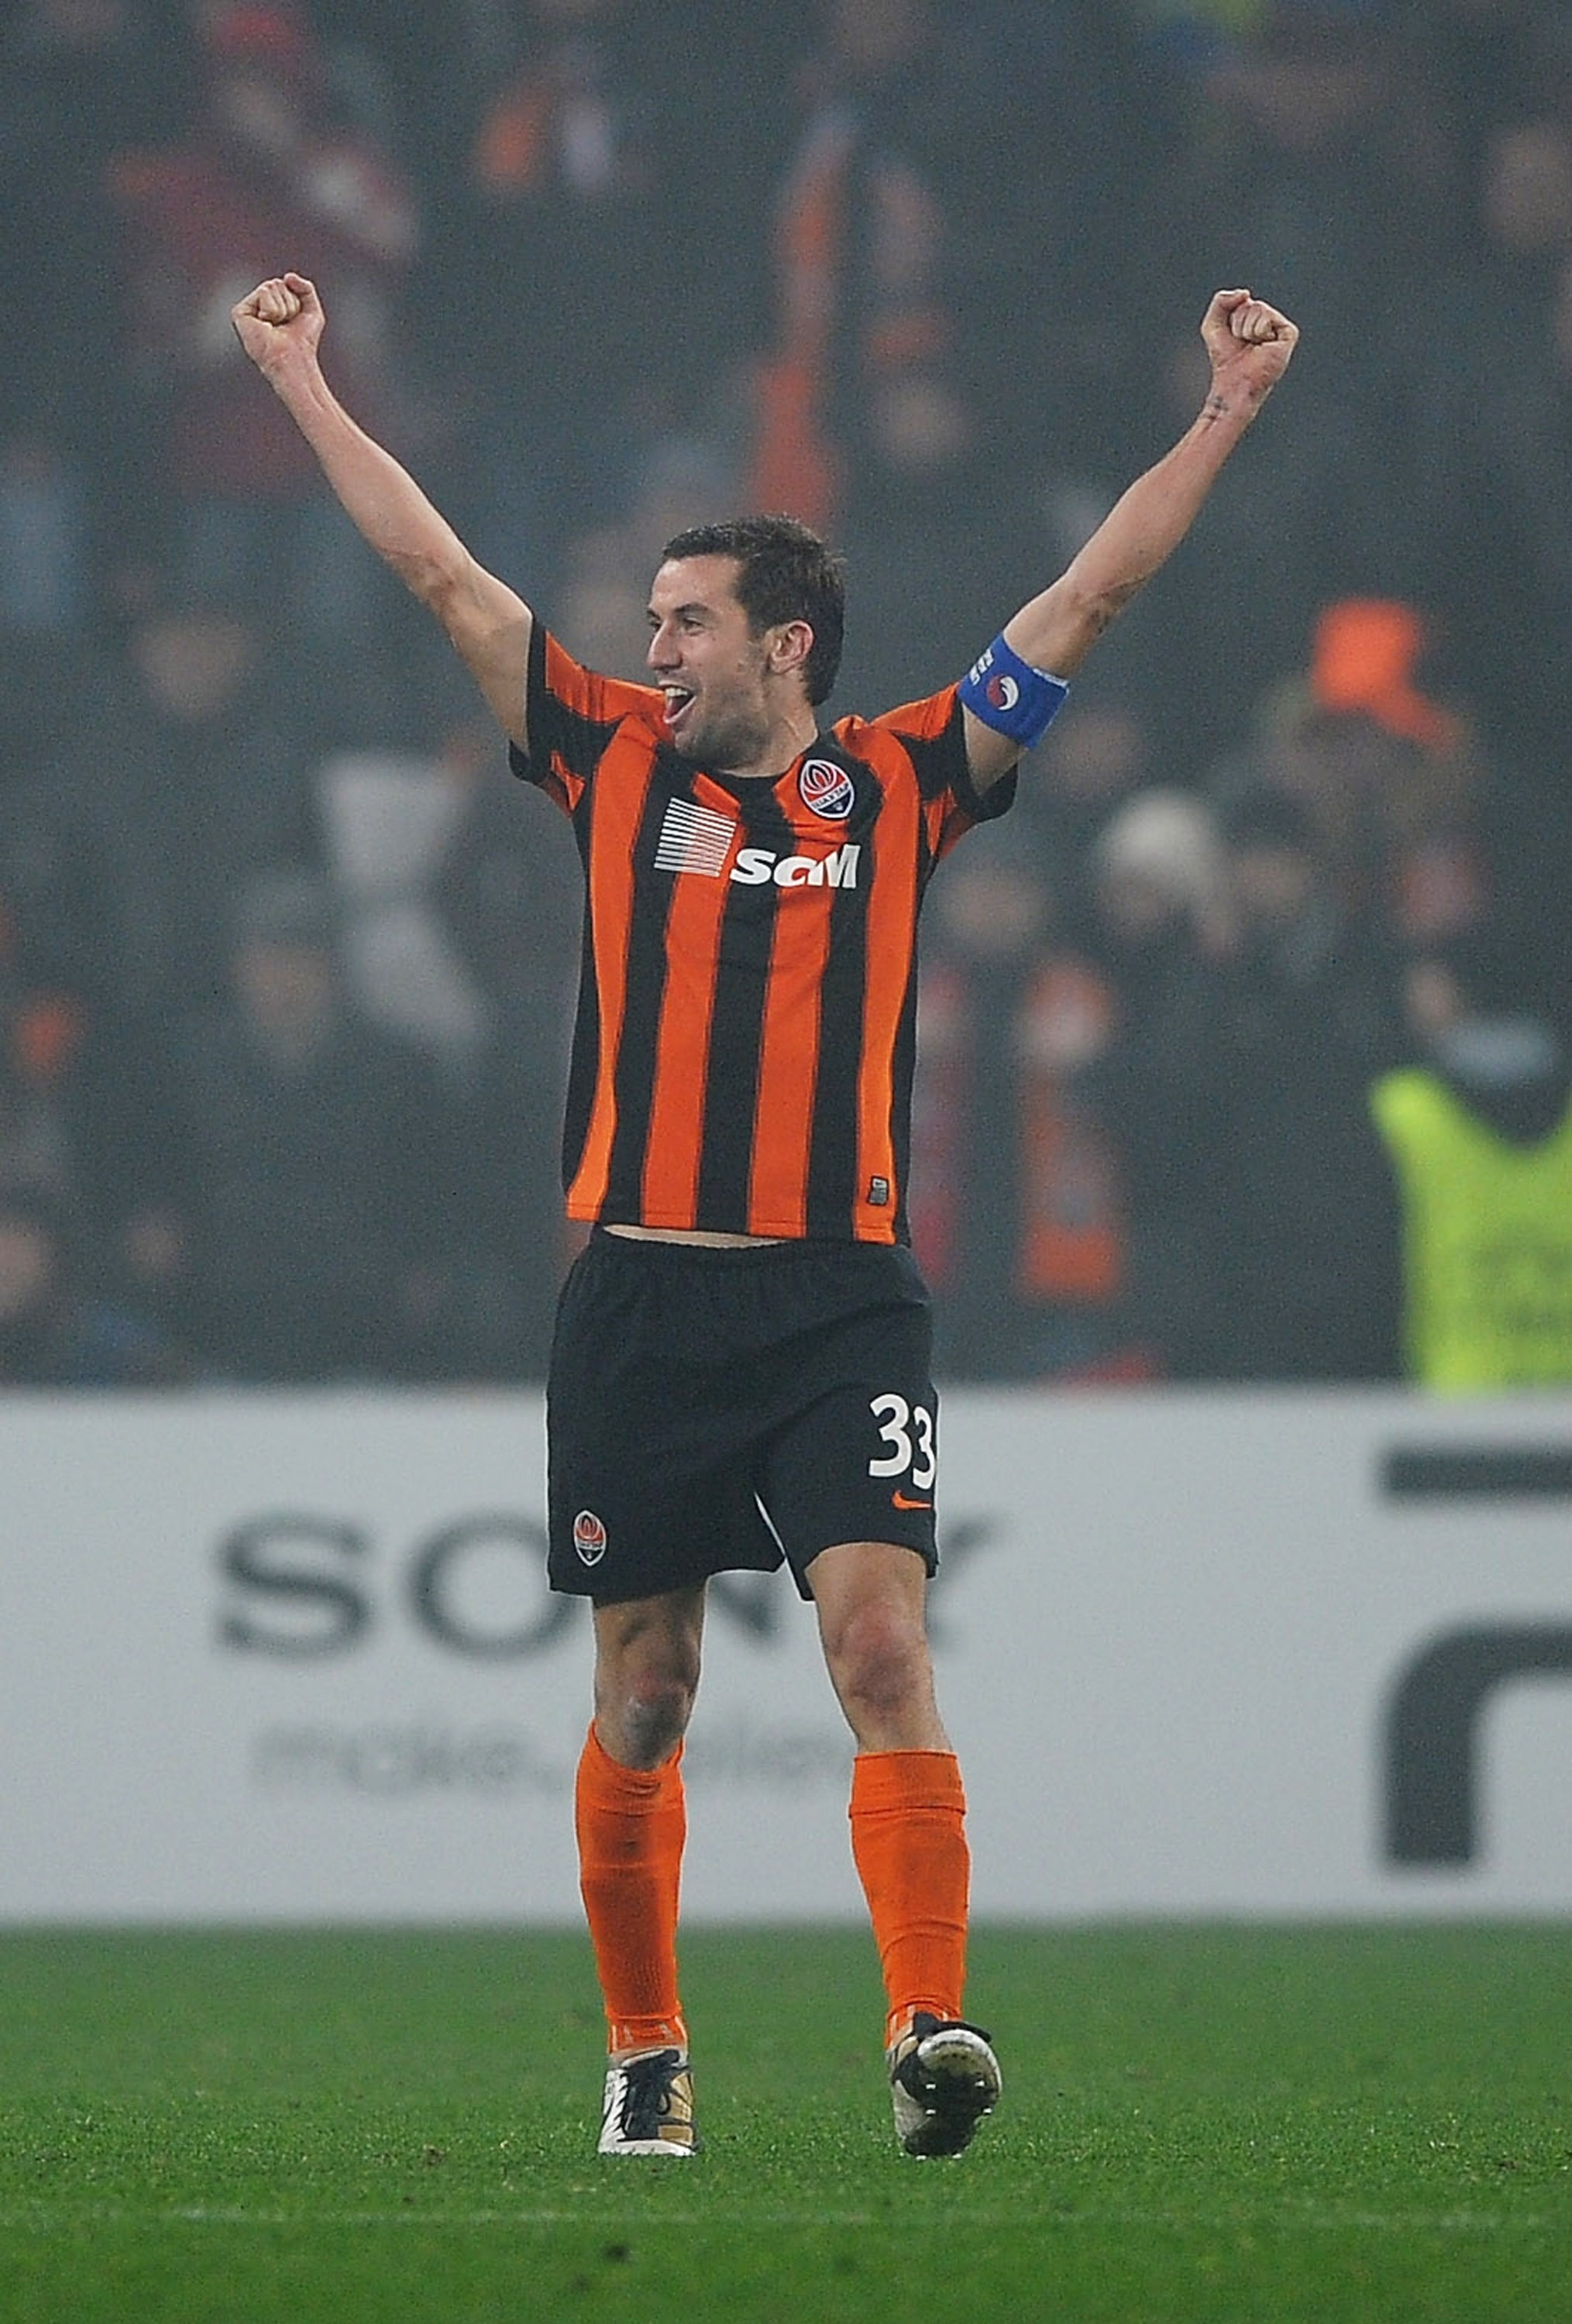 DONETSK, UKRAINE - NOVEMBER 03:  Darijo Srna of Shakhtar Donetsk celebrates victory after the Champions League Group H match between FC Shakhtar Donetsk and Arsenal at the Donbass Arena on November 3, 2010 in Donetsk, Ukraine.  (Photo by Laurence Griffith